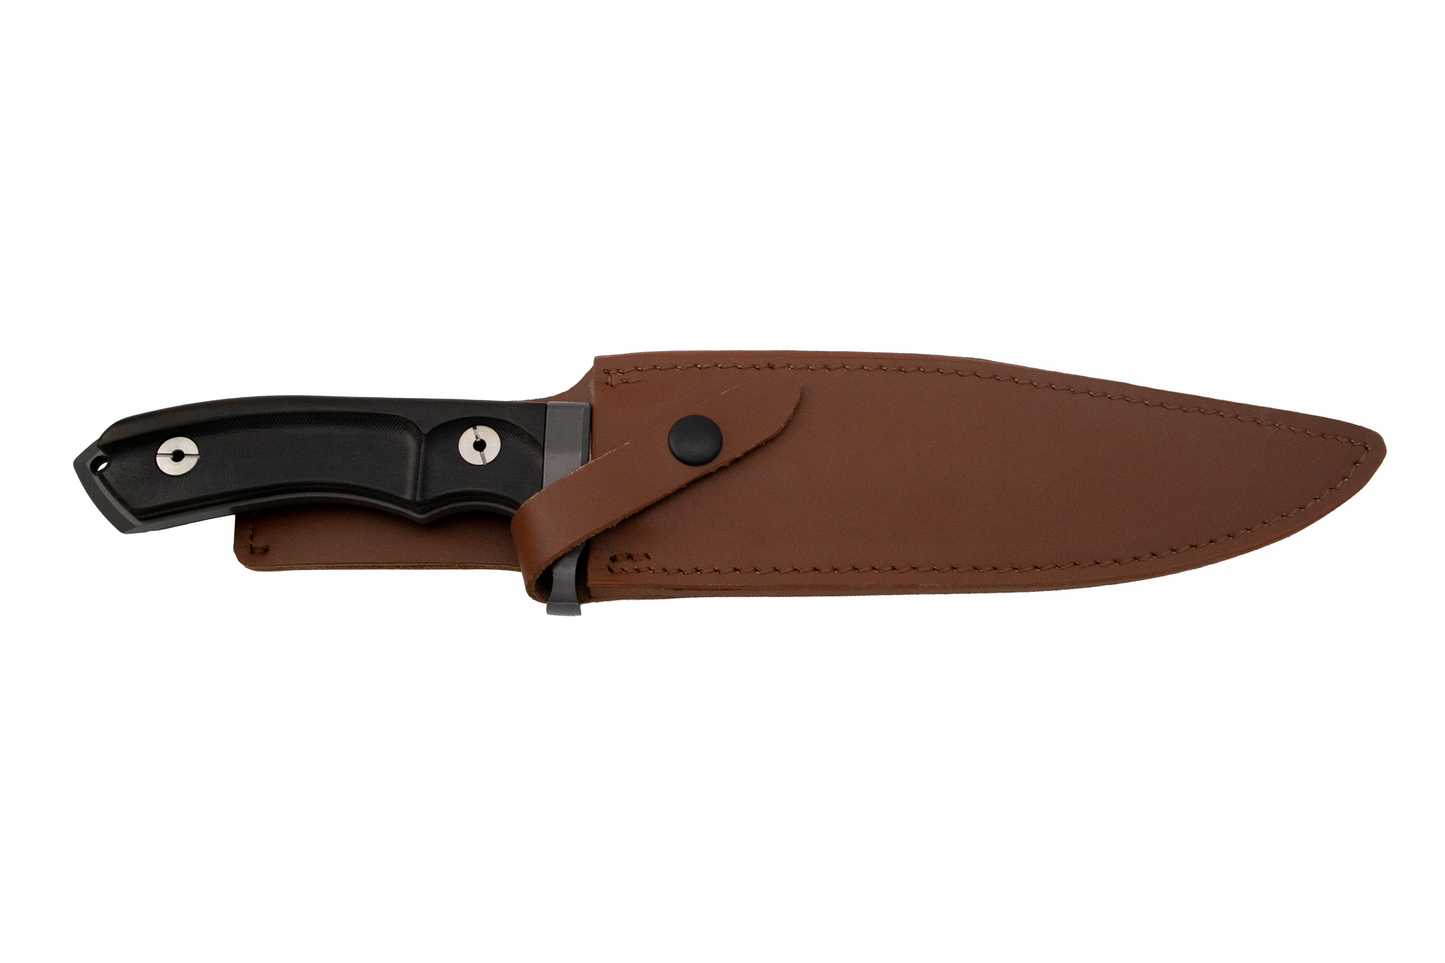 RAMBO V LAST BLOOD HEARTSTOPPER SURVIVAL HUNTING KNIFE WITH LEATHER SHEATH